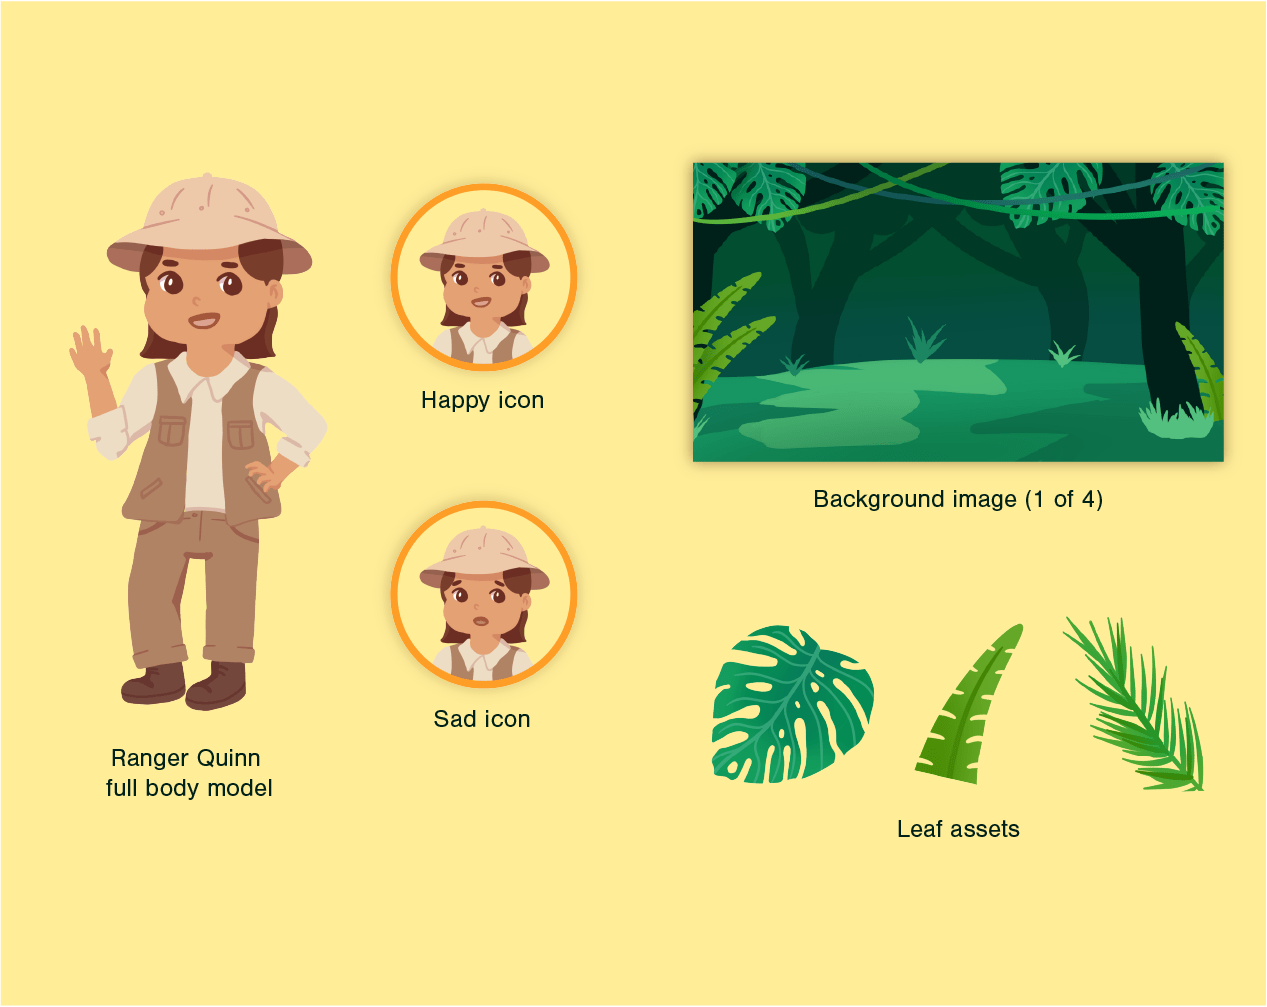 A picture of some of the illustrated assets used in the web app. Ranger Quinn and her two expression icons are included. A sample of one of the background images used in the web app is also included along with pictures of the three leaf assets used in all of the background images.